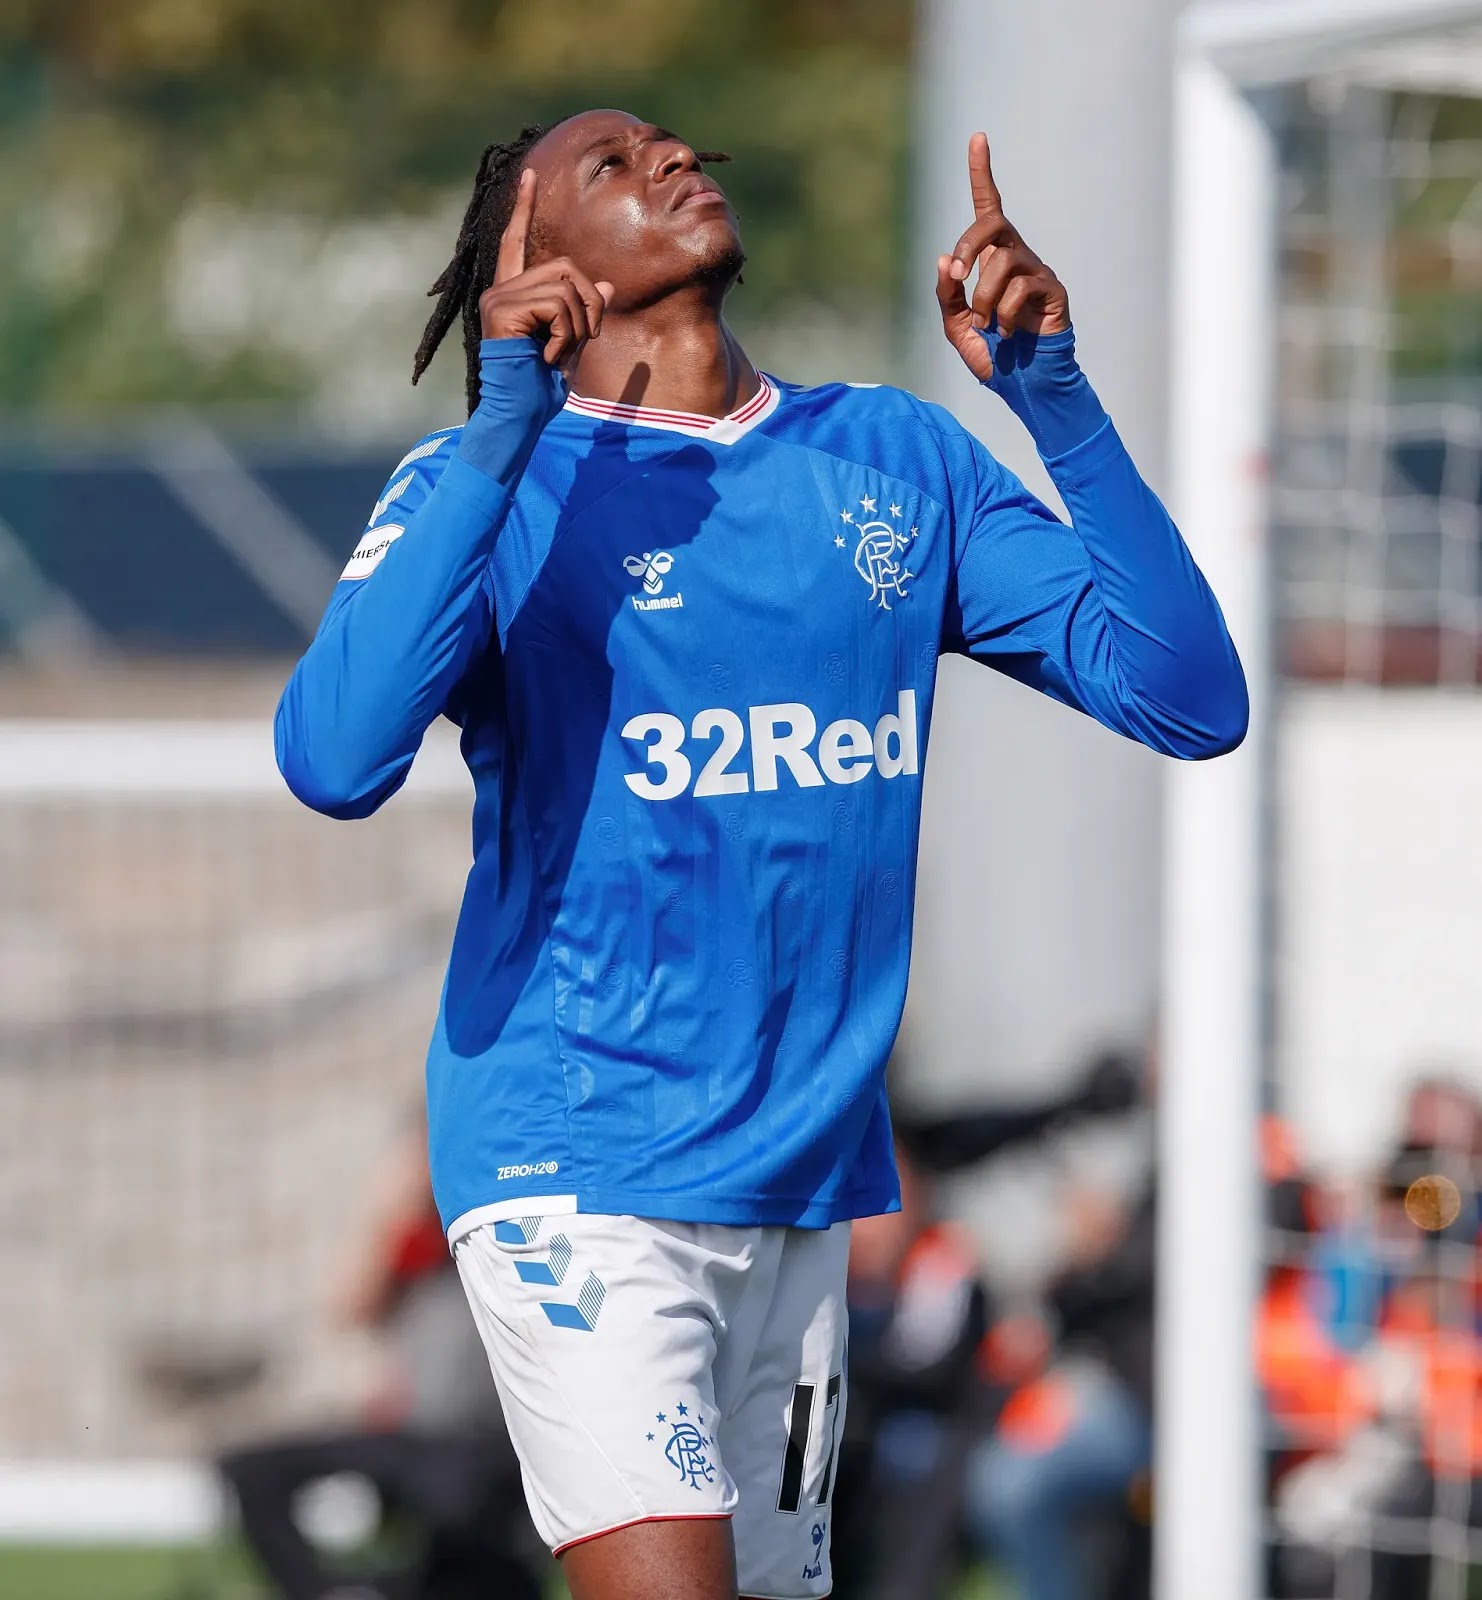 “More than Tierney” – Rangers have hit the jackpot